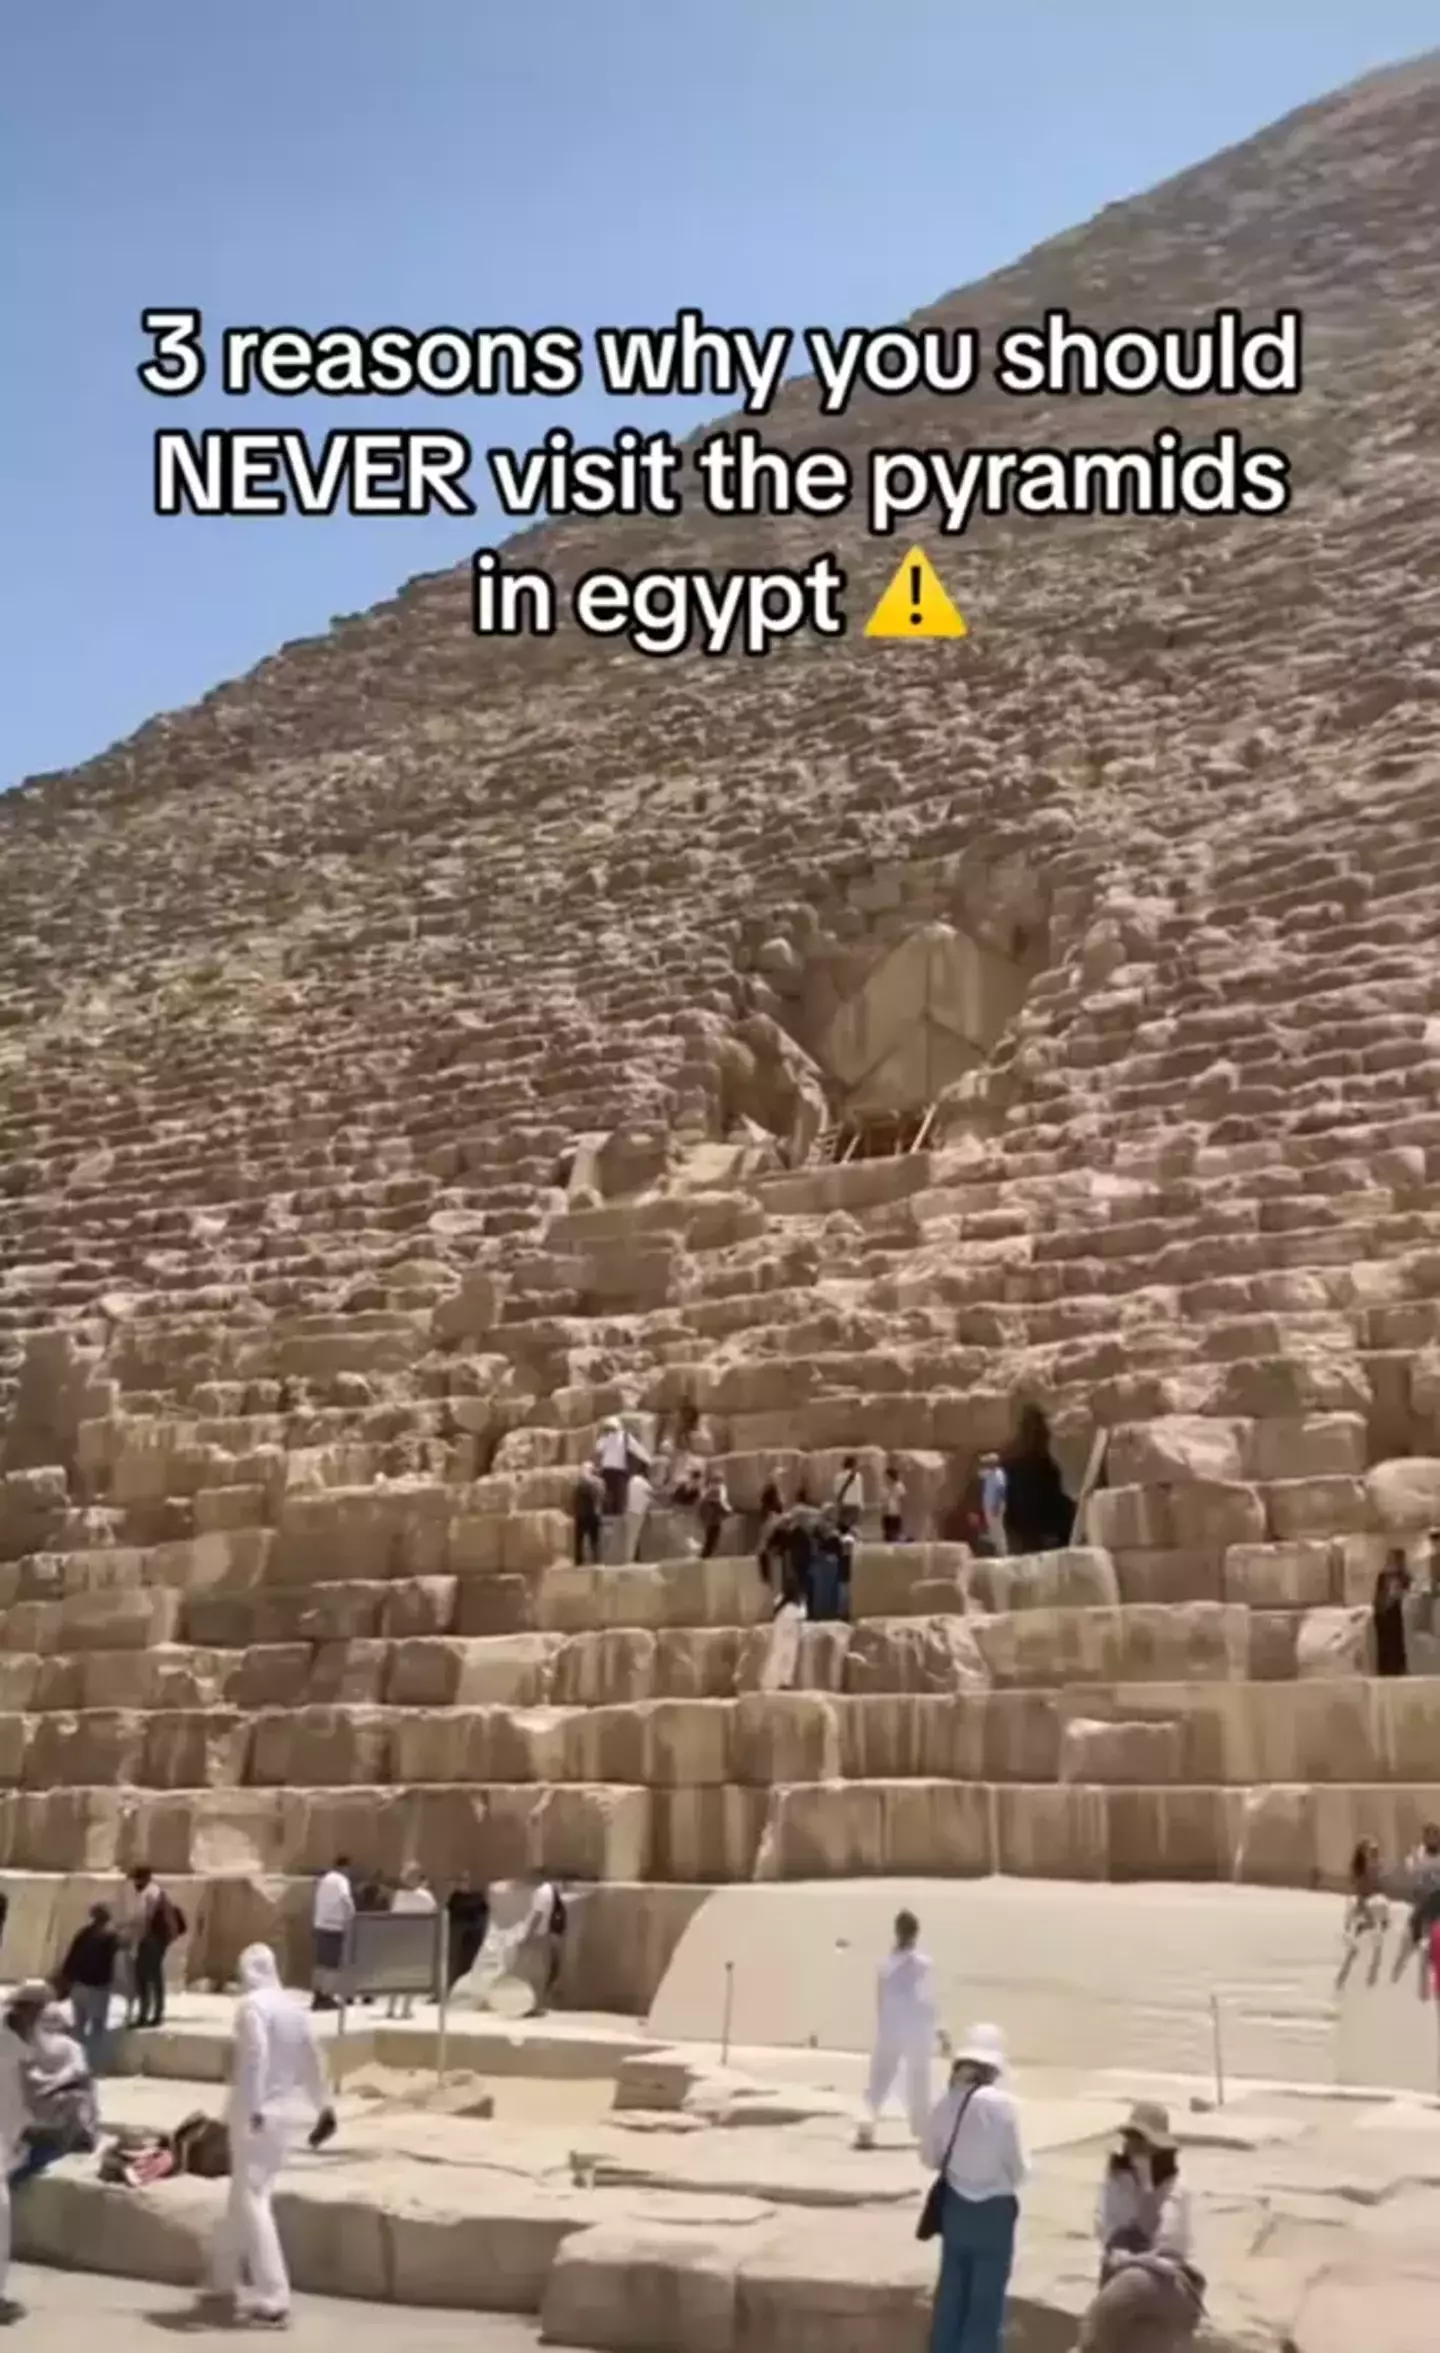 Why shouldn't you visit the pyramids?